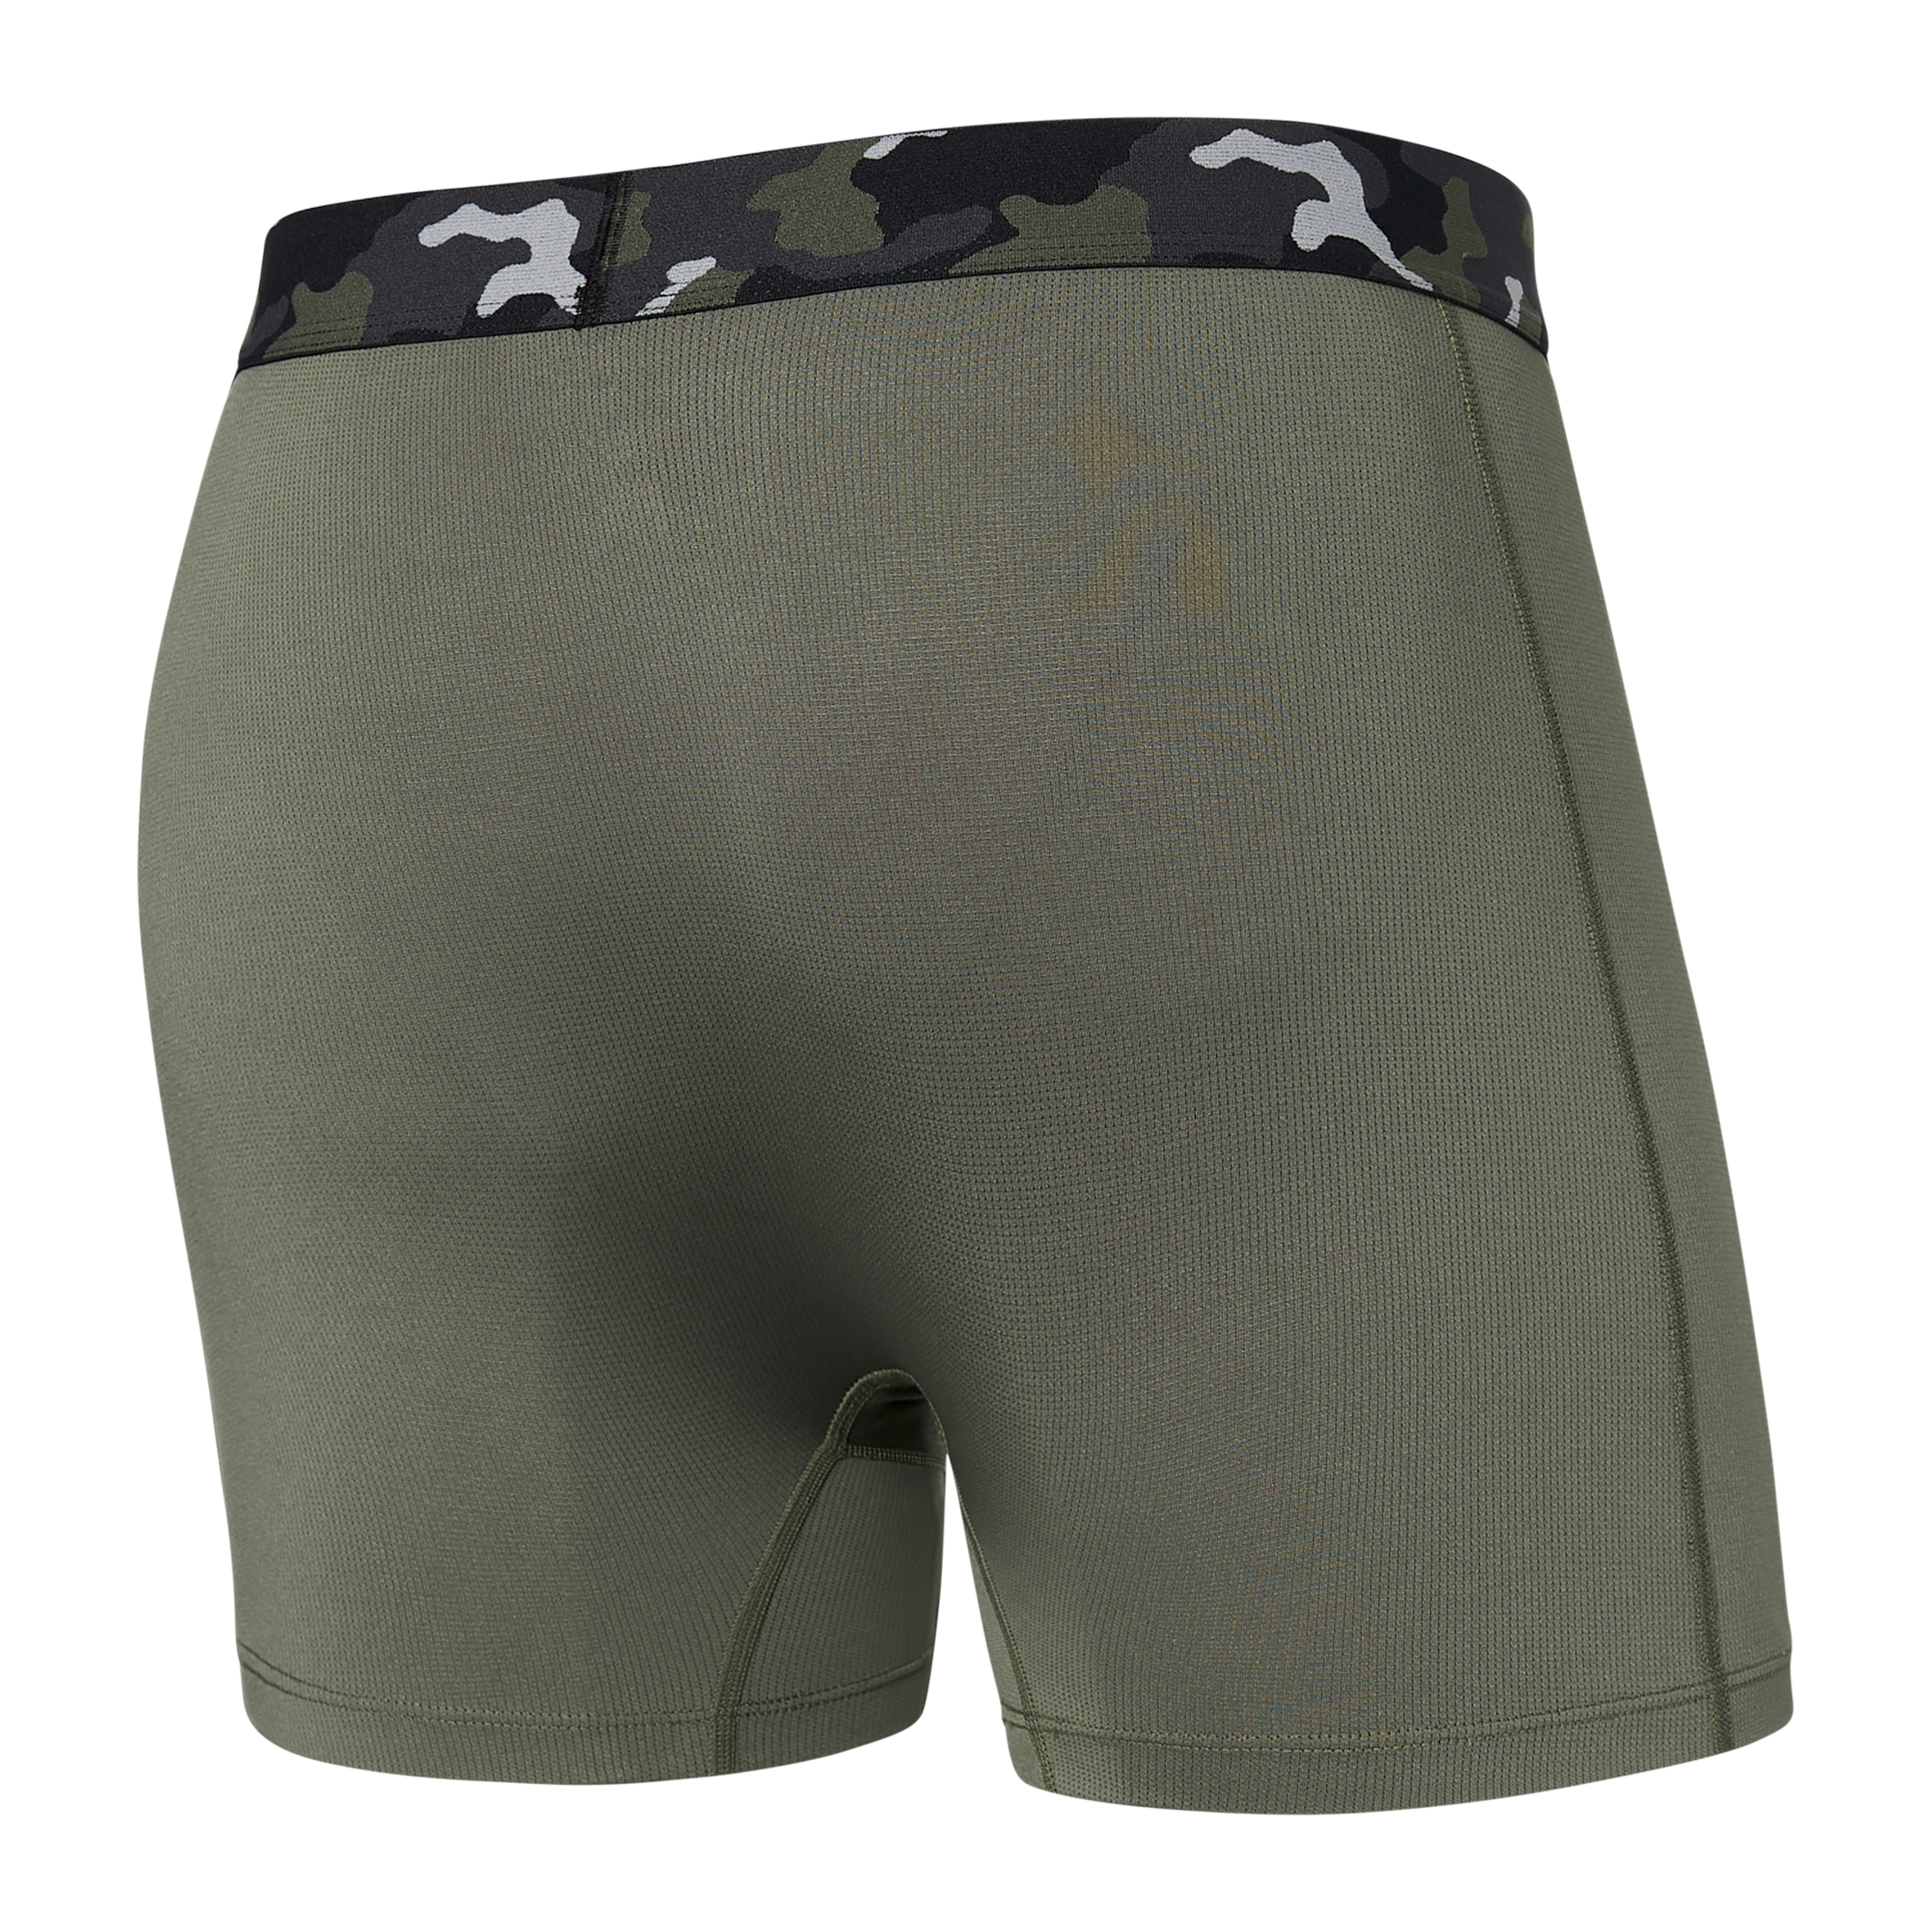 Back of Sport Mesh Boxer Brief Fly in Dusty Olive/Camo Waistband